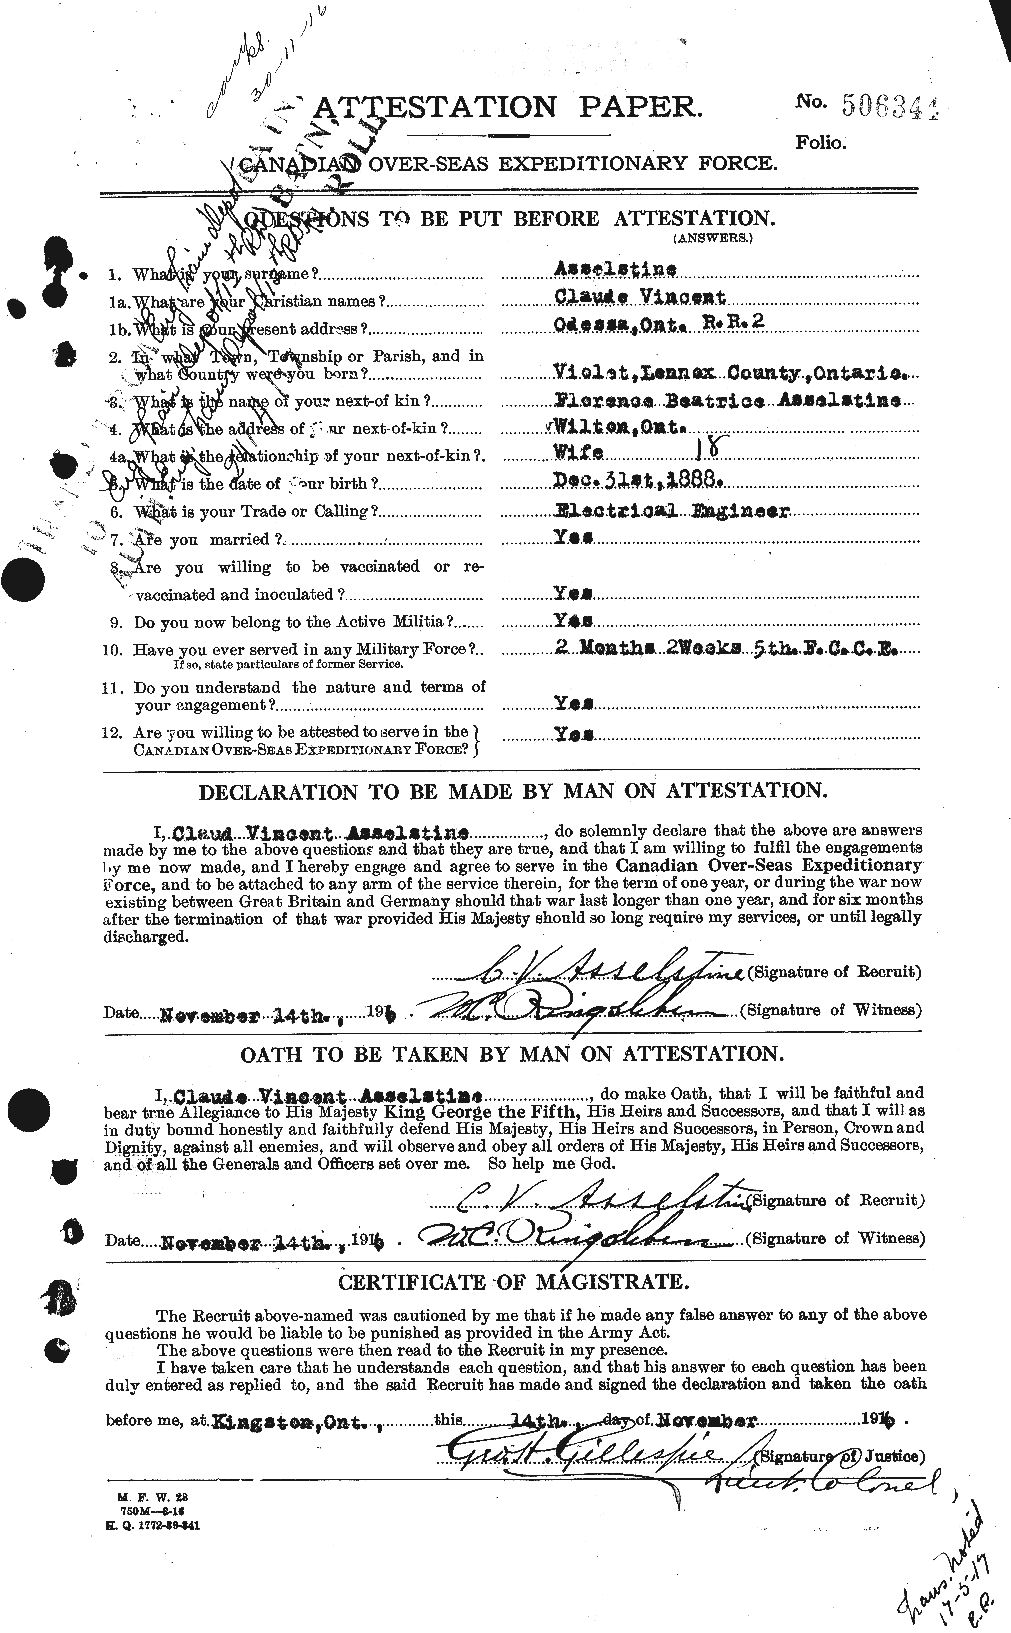 Personnel Records of the First World War - CEF 223458a